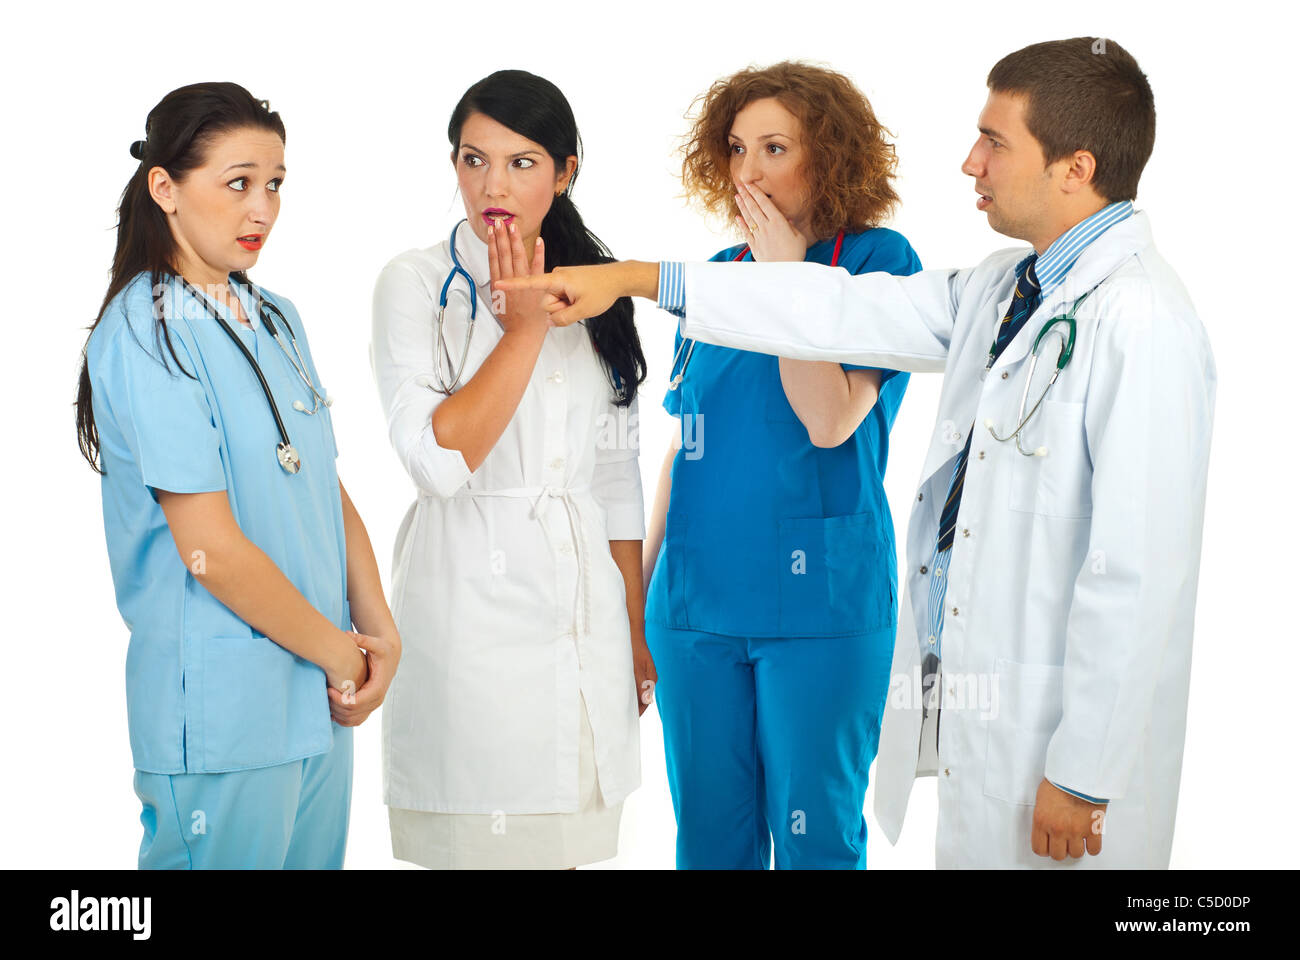 Hospital manager accusing doctor woman and pointing and her colleagues doctors women being surprised and scared isolated Stock Photo